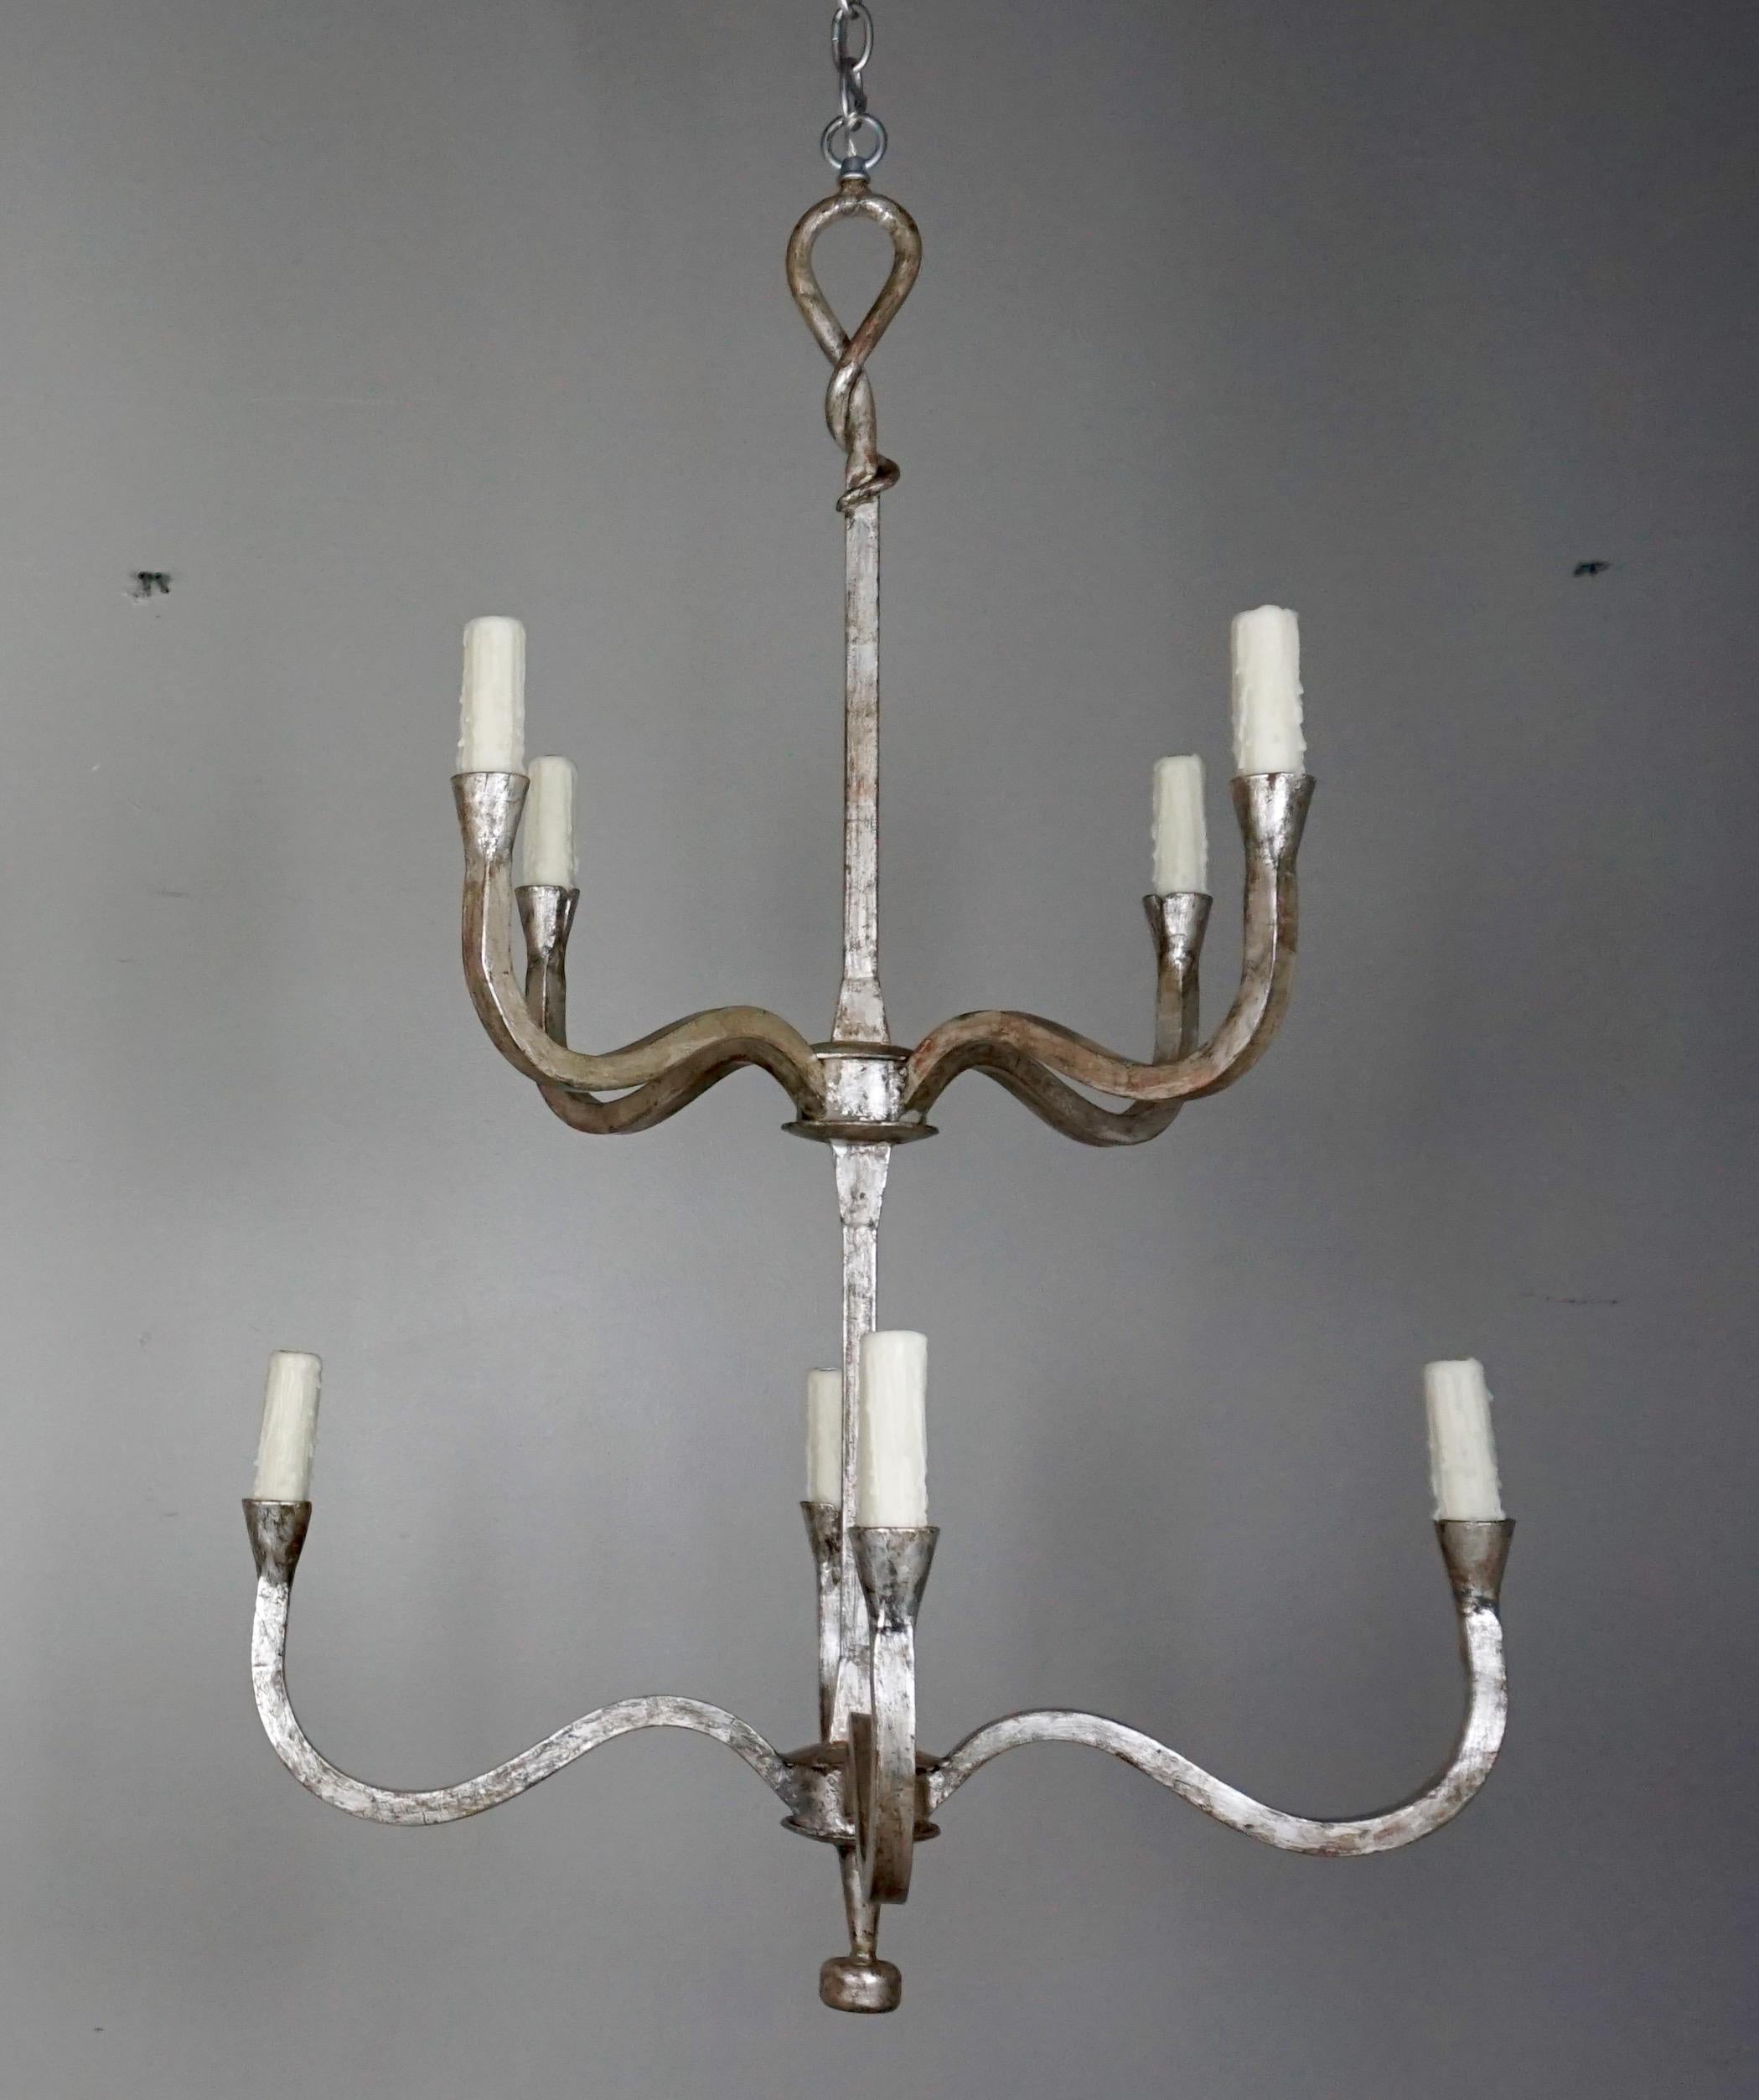 Pair of silver gilt wrought iron two-tier chandeliers. Each chandelier has eight candleholders with drip wax candle covers. The fixtures are wired and include chain and canopy. The fixture also comes in gold leaf a tete negre finish.